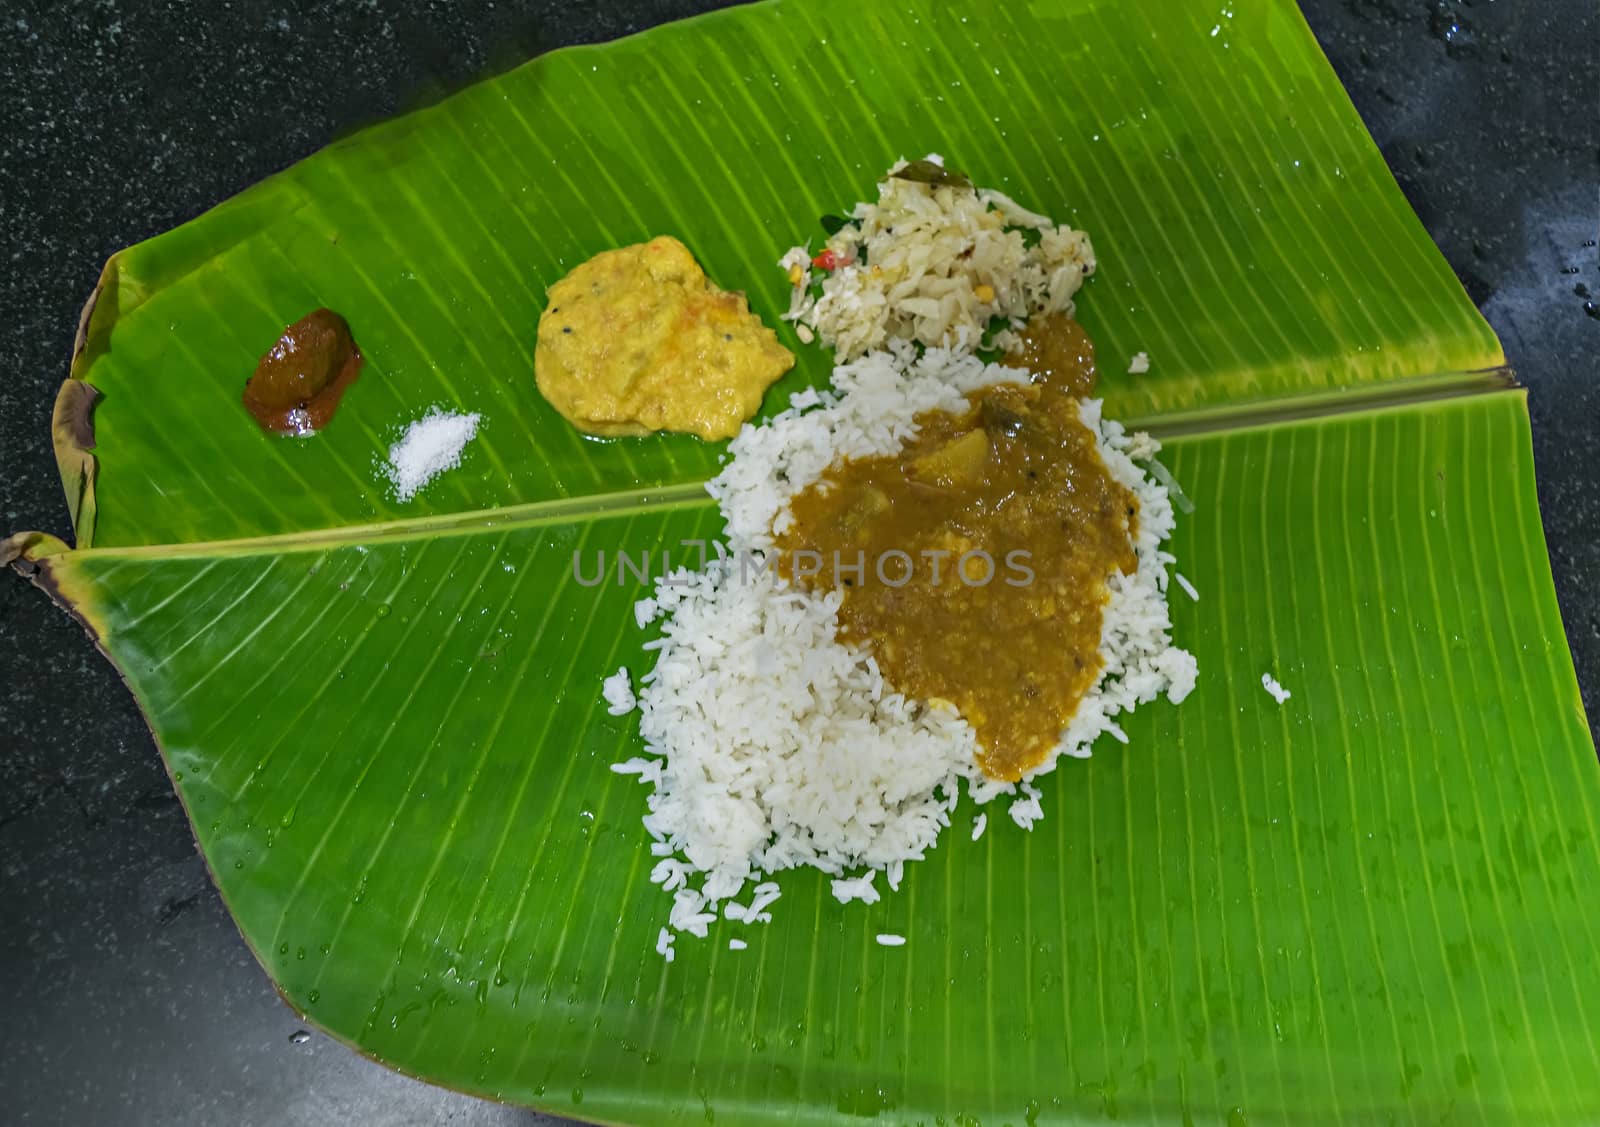 Authentic traditional south Indian meals served on banana leaf with rice, curry, pickle.. by lalam